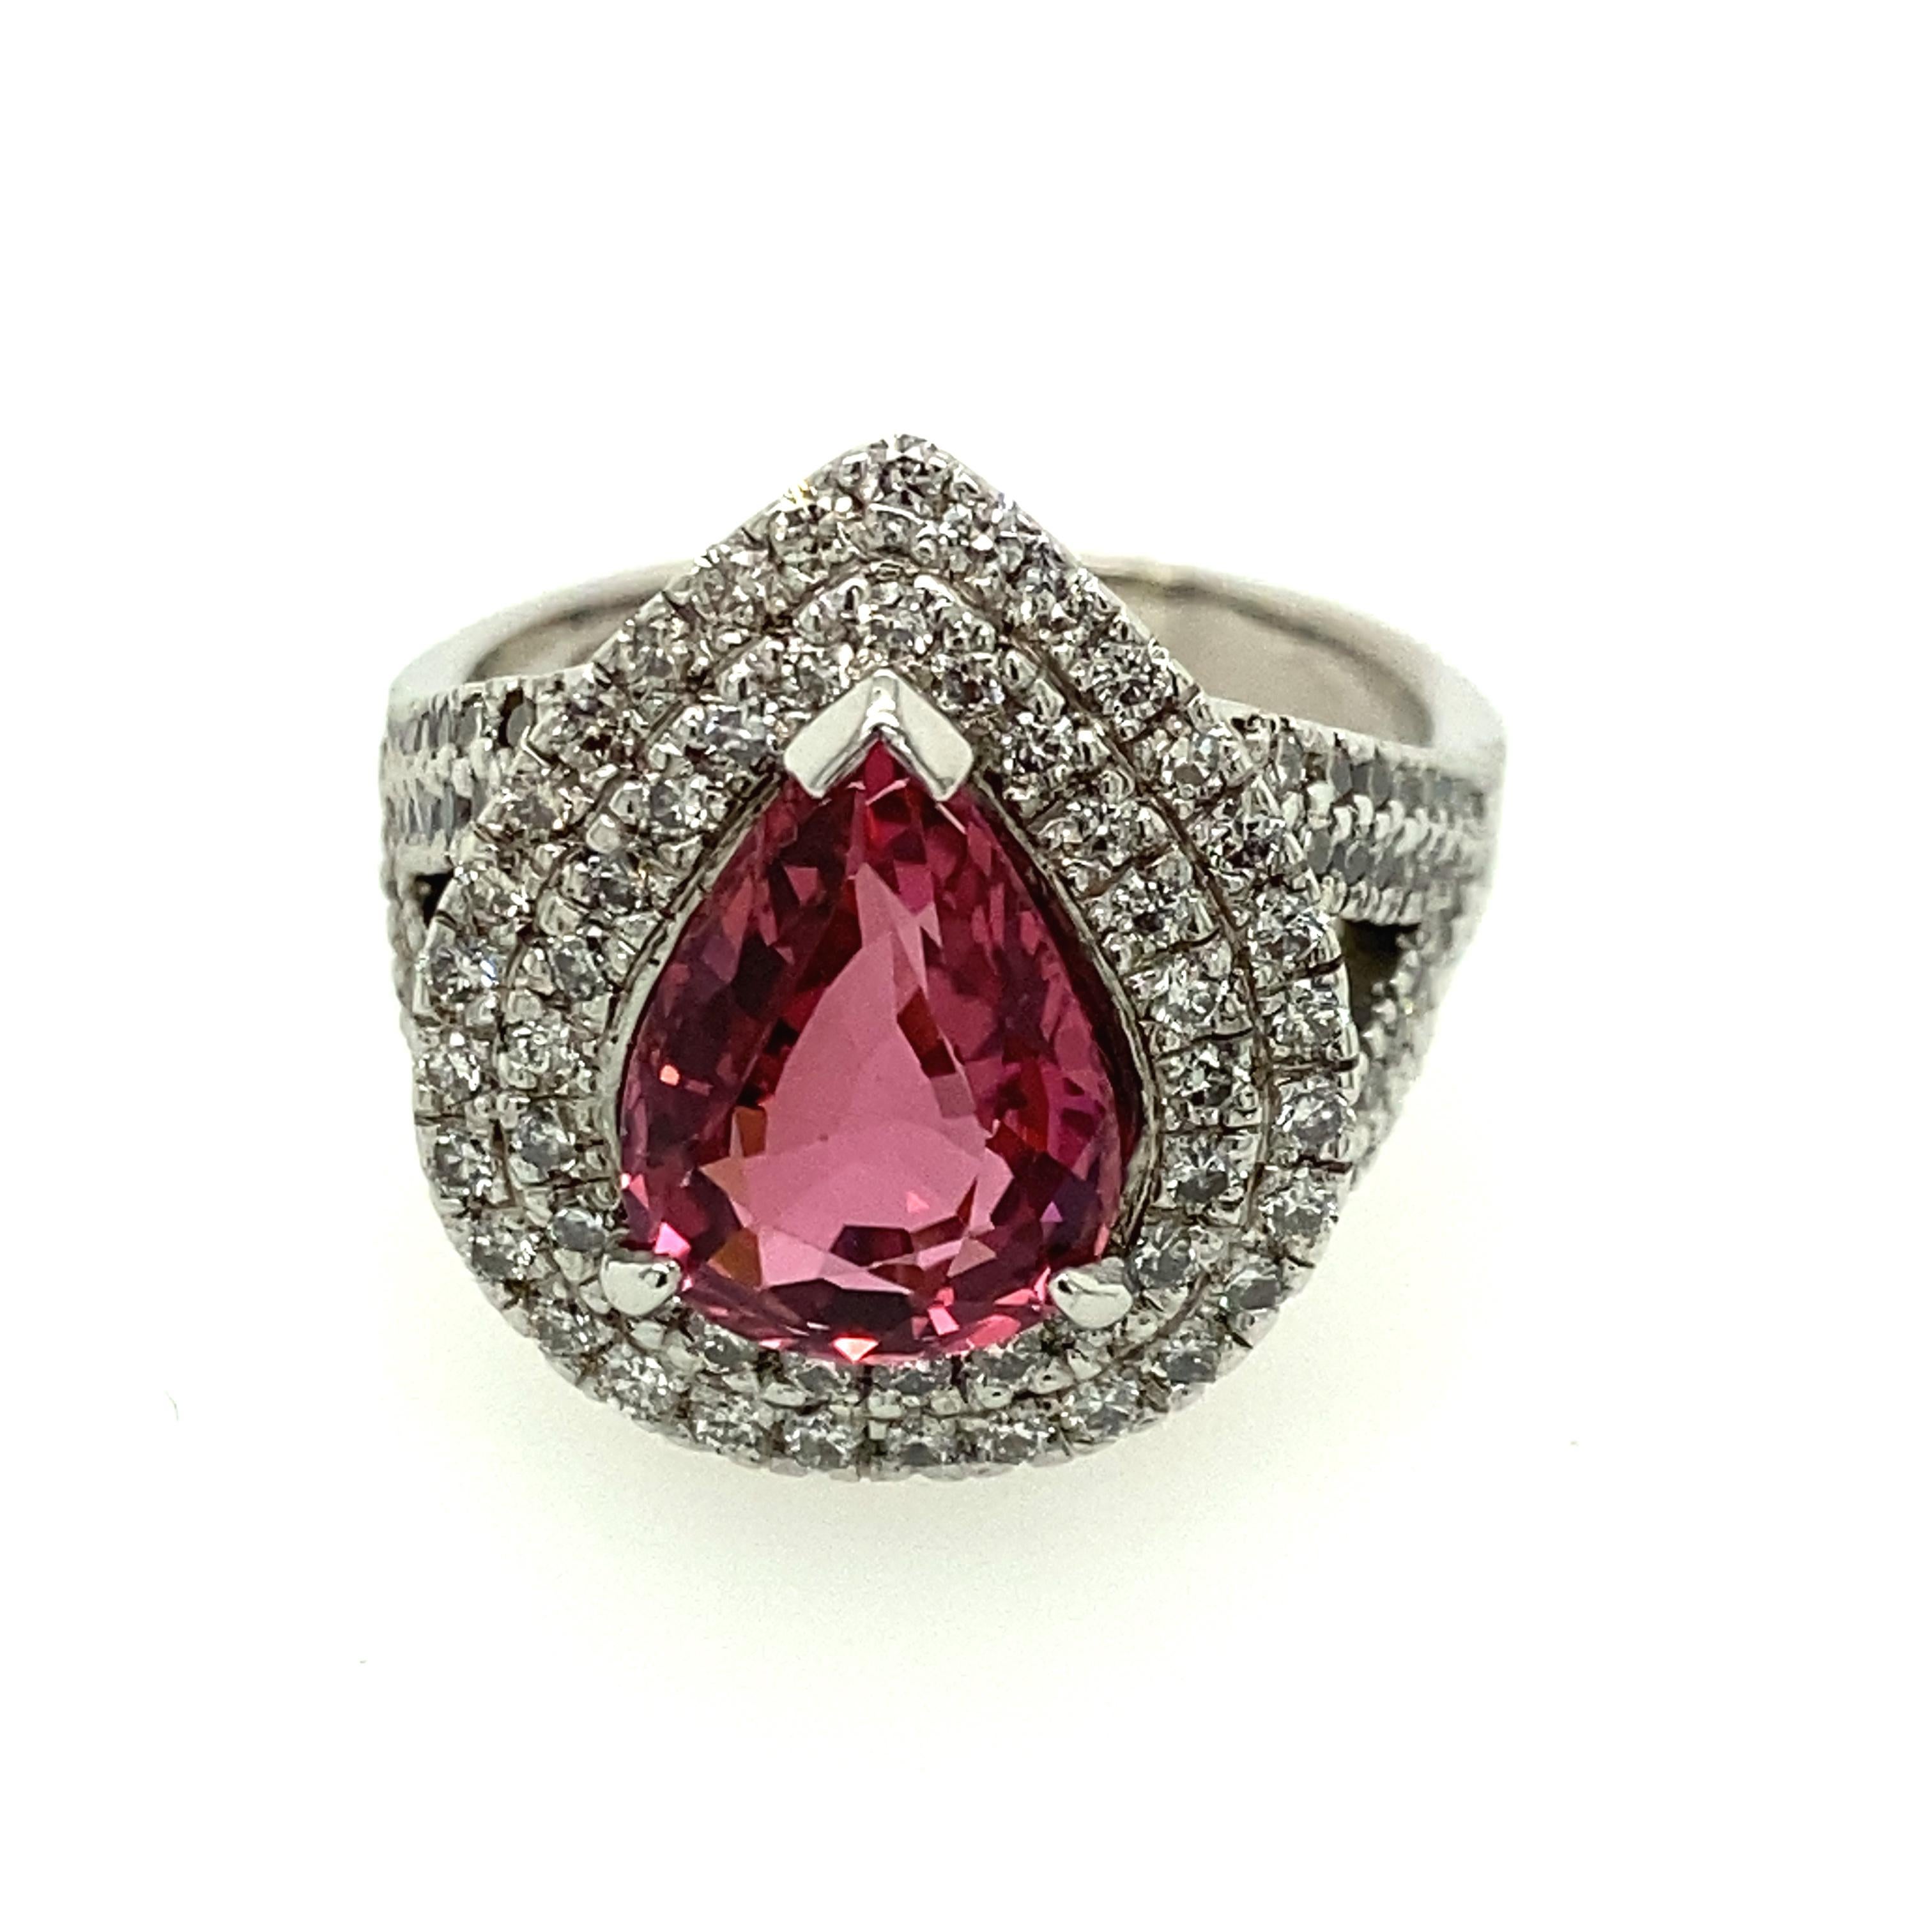 18 Karat White Gold Pink Tourmaline Diamond Ring.
The center stone is a pear shape pink tourmaline secured in a three claw setting. Surrounding the pink tourmaline is two rows of diamonds forming a pear shaped cluster head. Two split top shoulders